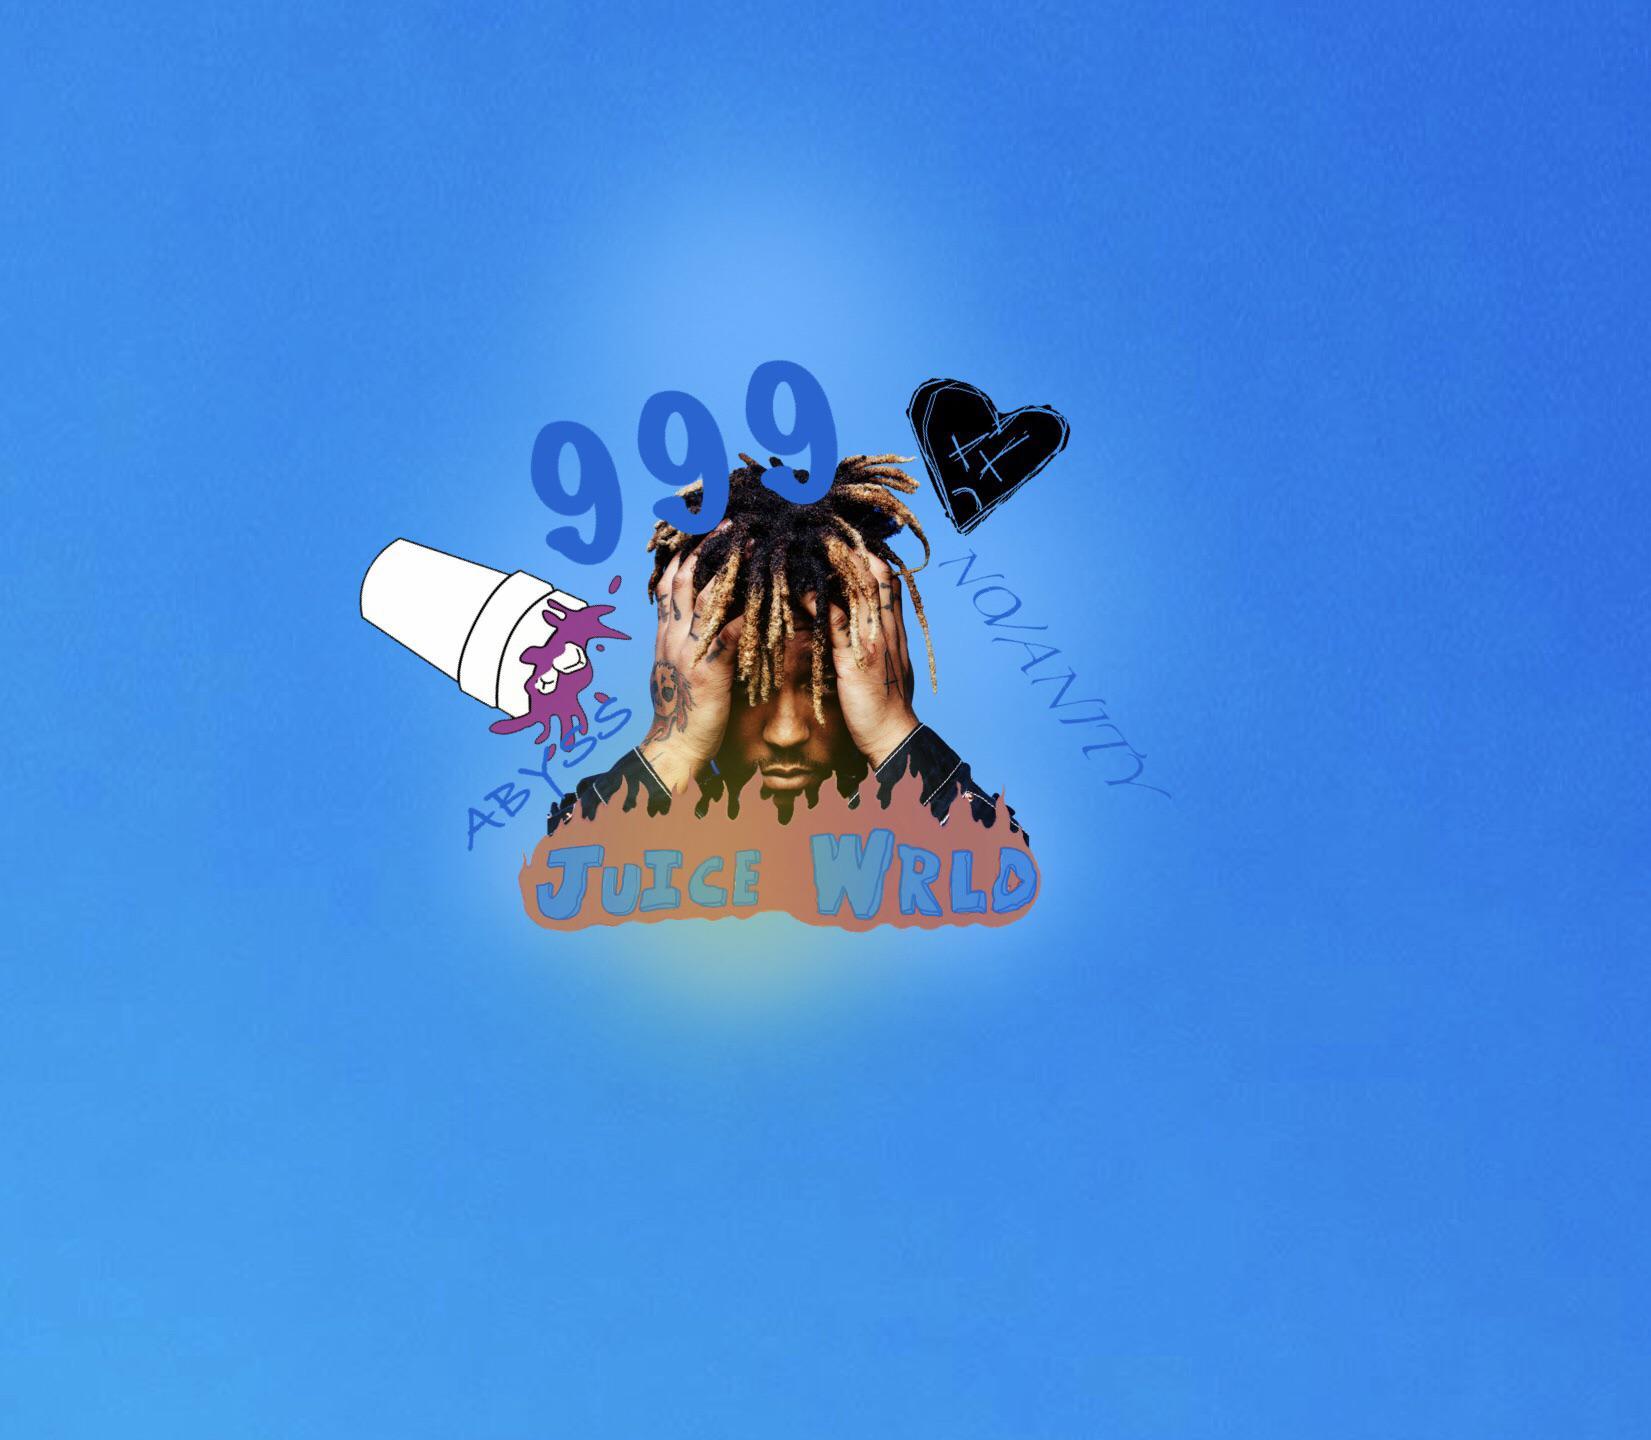 Juice Wrld Aesthetic PC Wallpapers - Wallpaper Cave